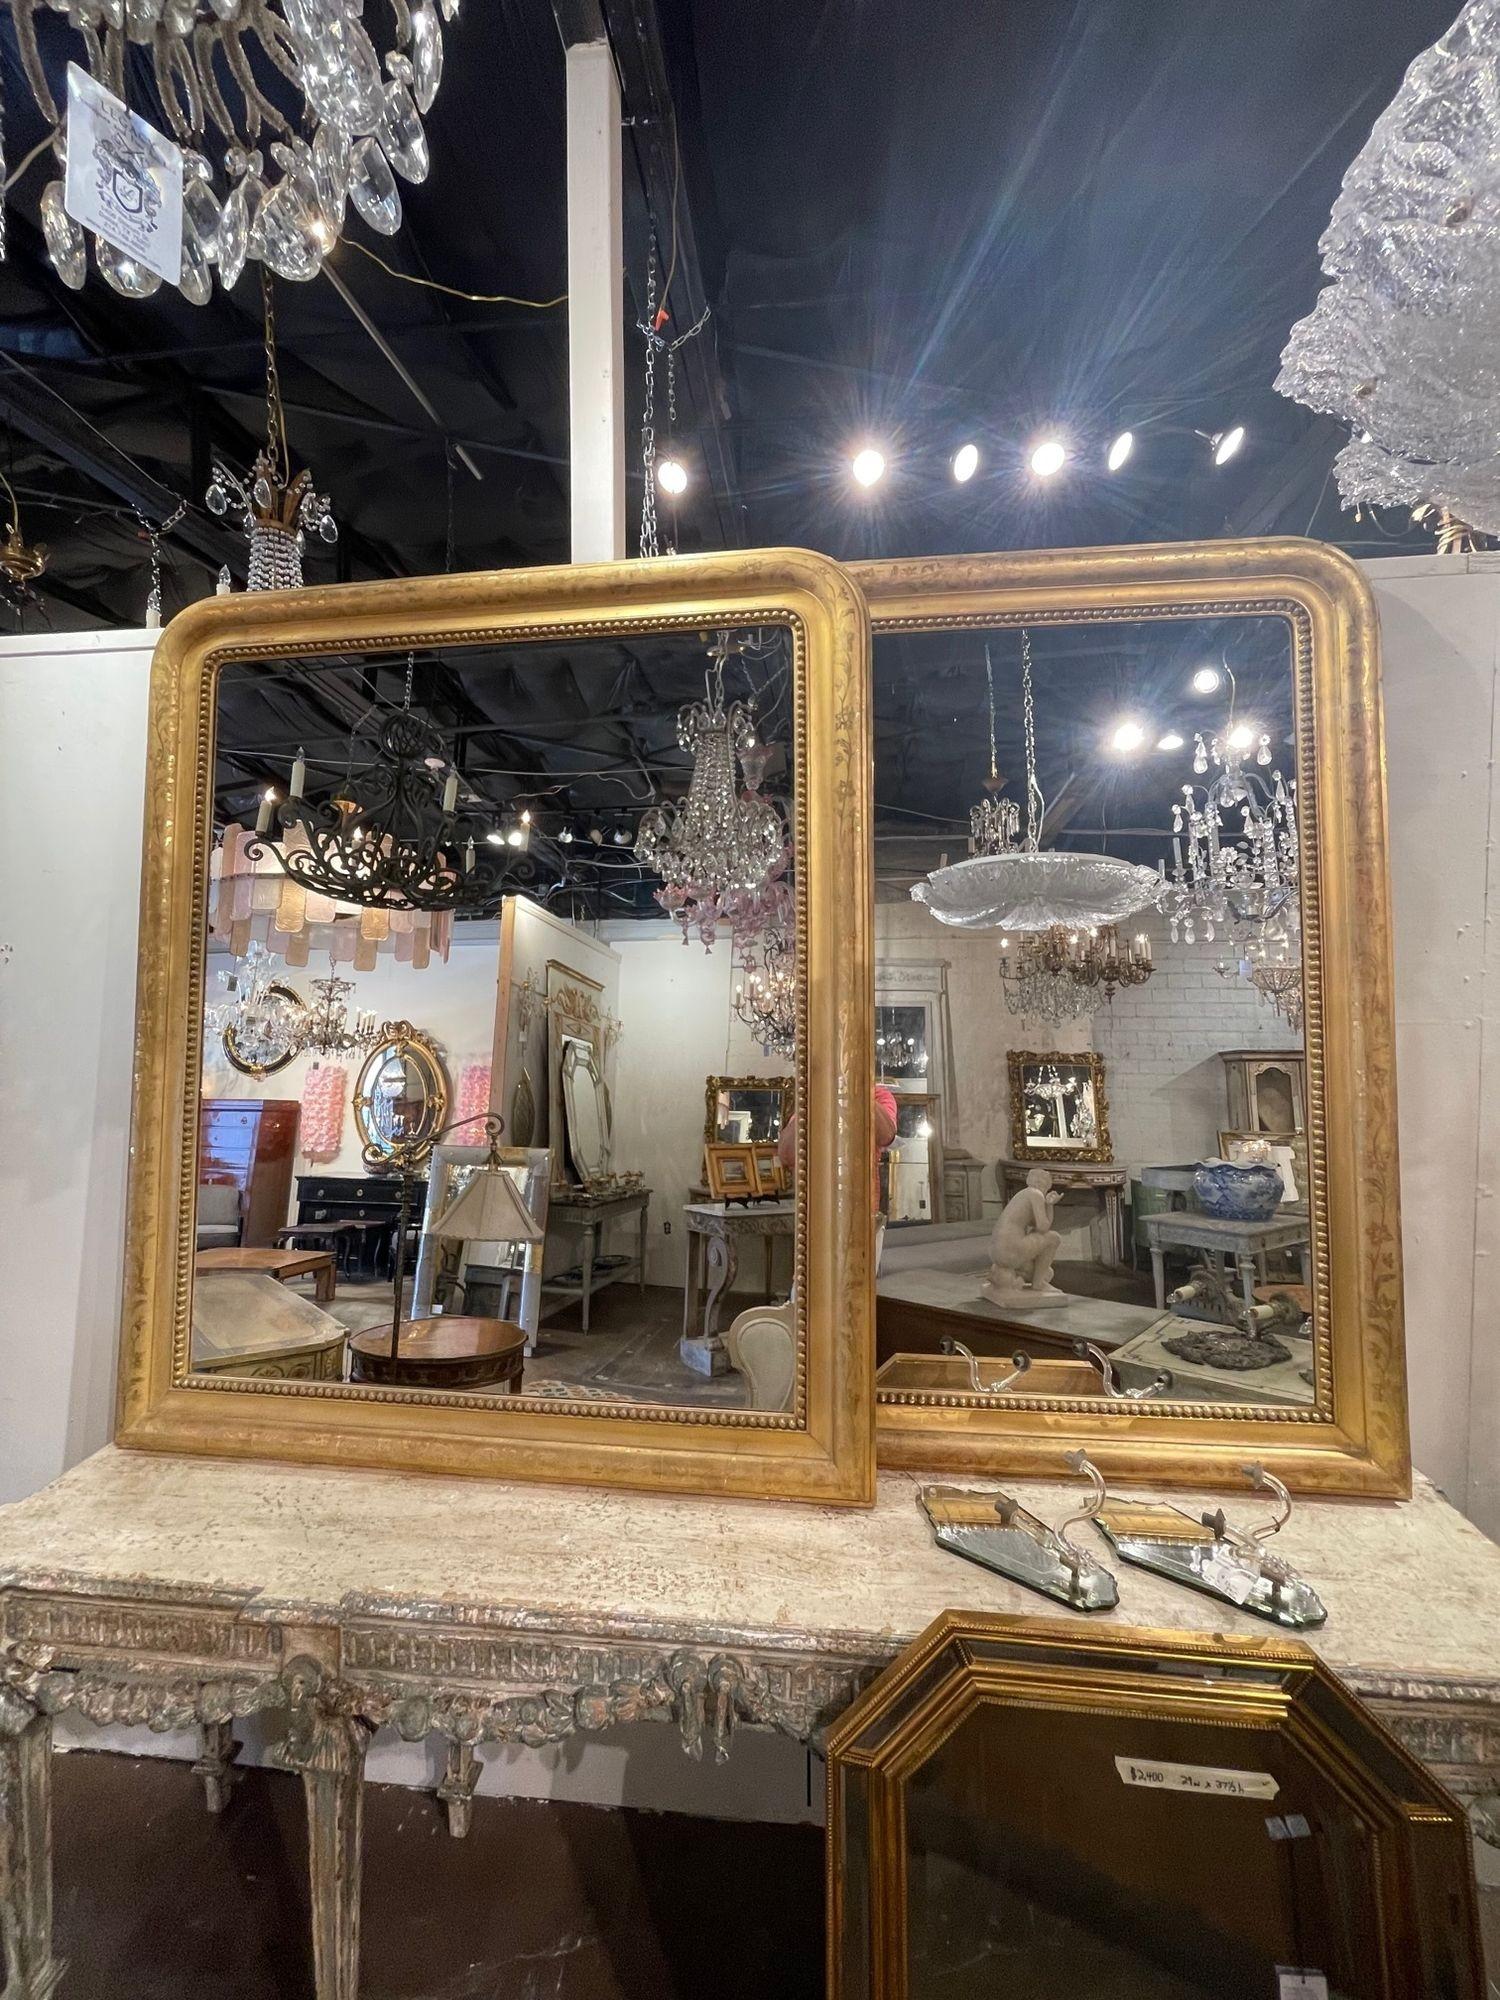 Gorgeous large scale 19th century French Louis Philippe giltwood mirrors with a decorative floral pattern. These also have a pretty inner border. Great for a variety of decors!